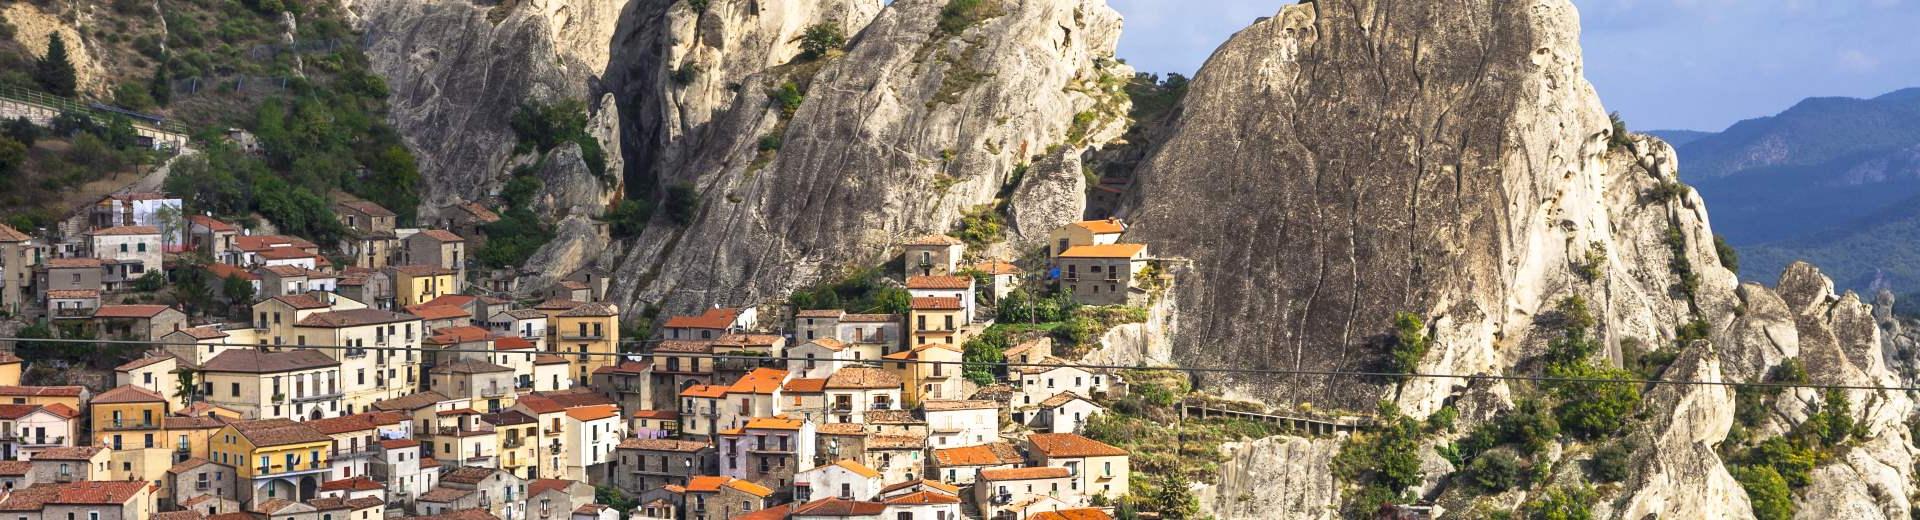 Find the ideal holiday home in Basilicata for your Italian adventure - Casamundo